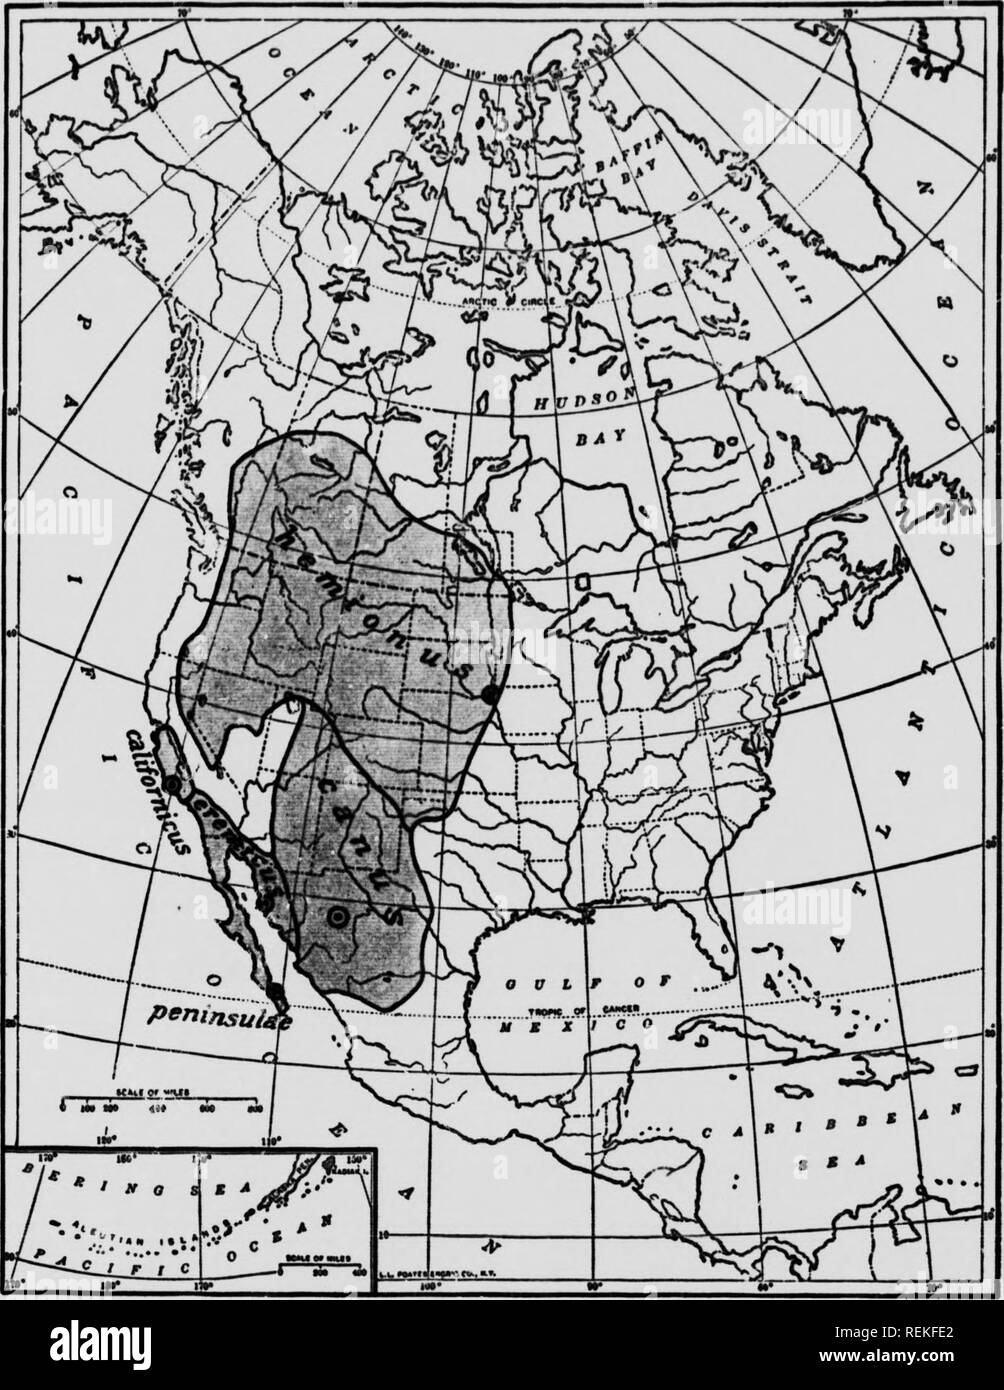 Life-histories of northern animals [microform] : an account of the mammals  of Manitoba. Mammals; Mammals; MammifÃ¨res; MammifÃ¨res. MAP 6âPRmrnvB  rahgb of thb mdlb blacktail aud its five races. CXAxm/dU Amfanu (SUt.)